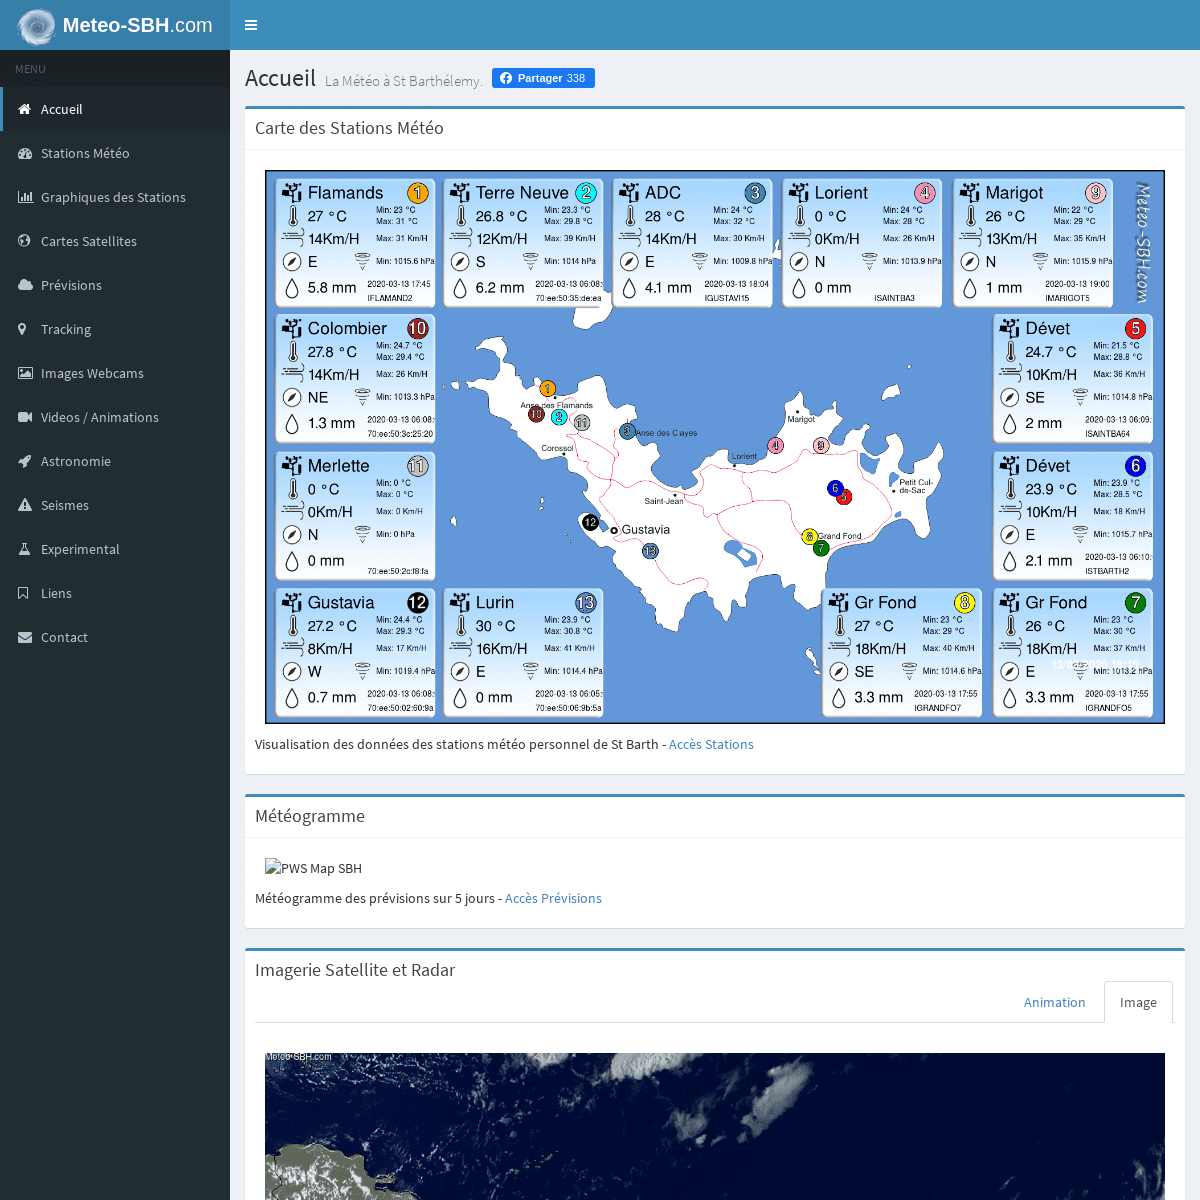 A complete backup of meteo-sbh.com